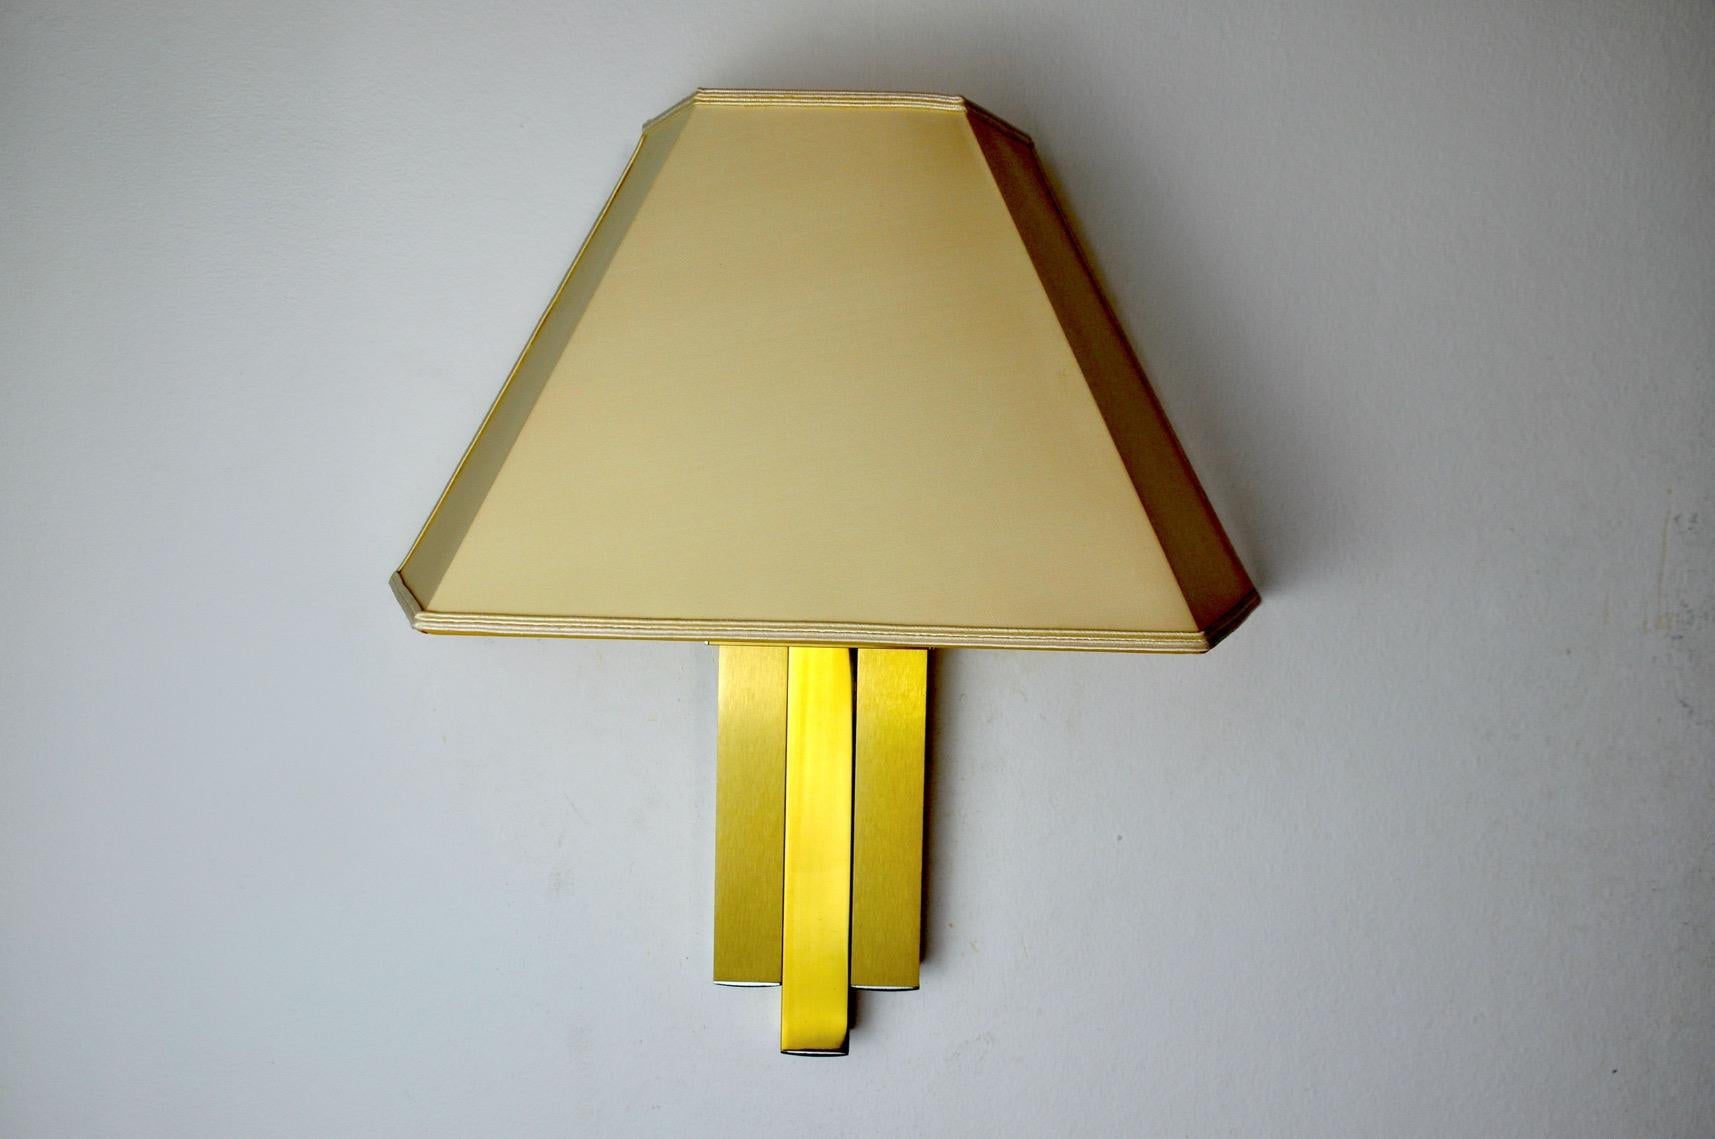 Superb and rare lumica wall lamp, design attributed to willy rizzo, produced in spain in the 1970s. Piece never used in perfect working order, small stain on the lampshade. Unique object that will illuminate wonderfully and bring a real design touch